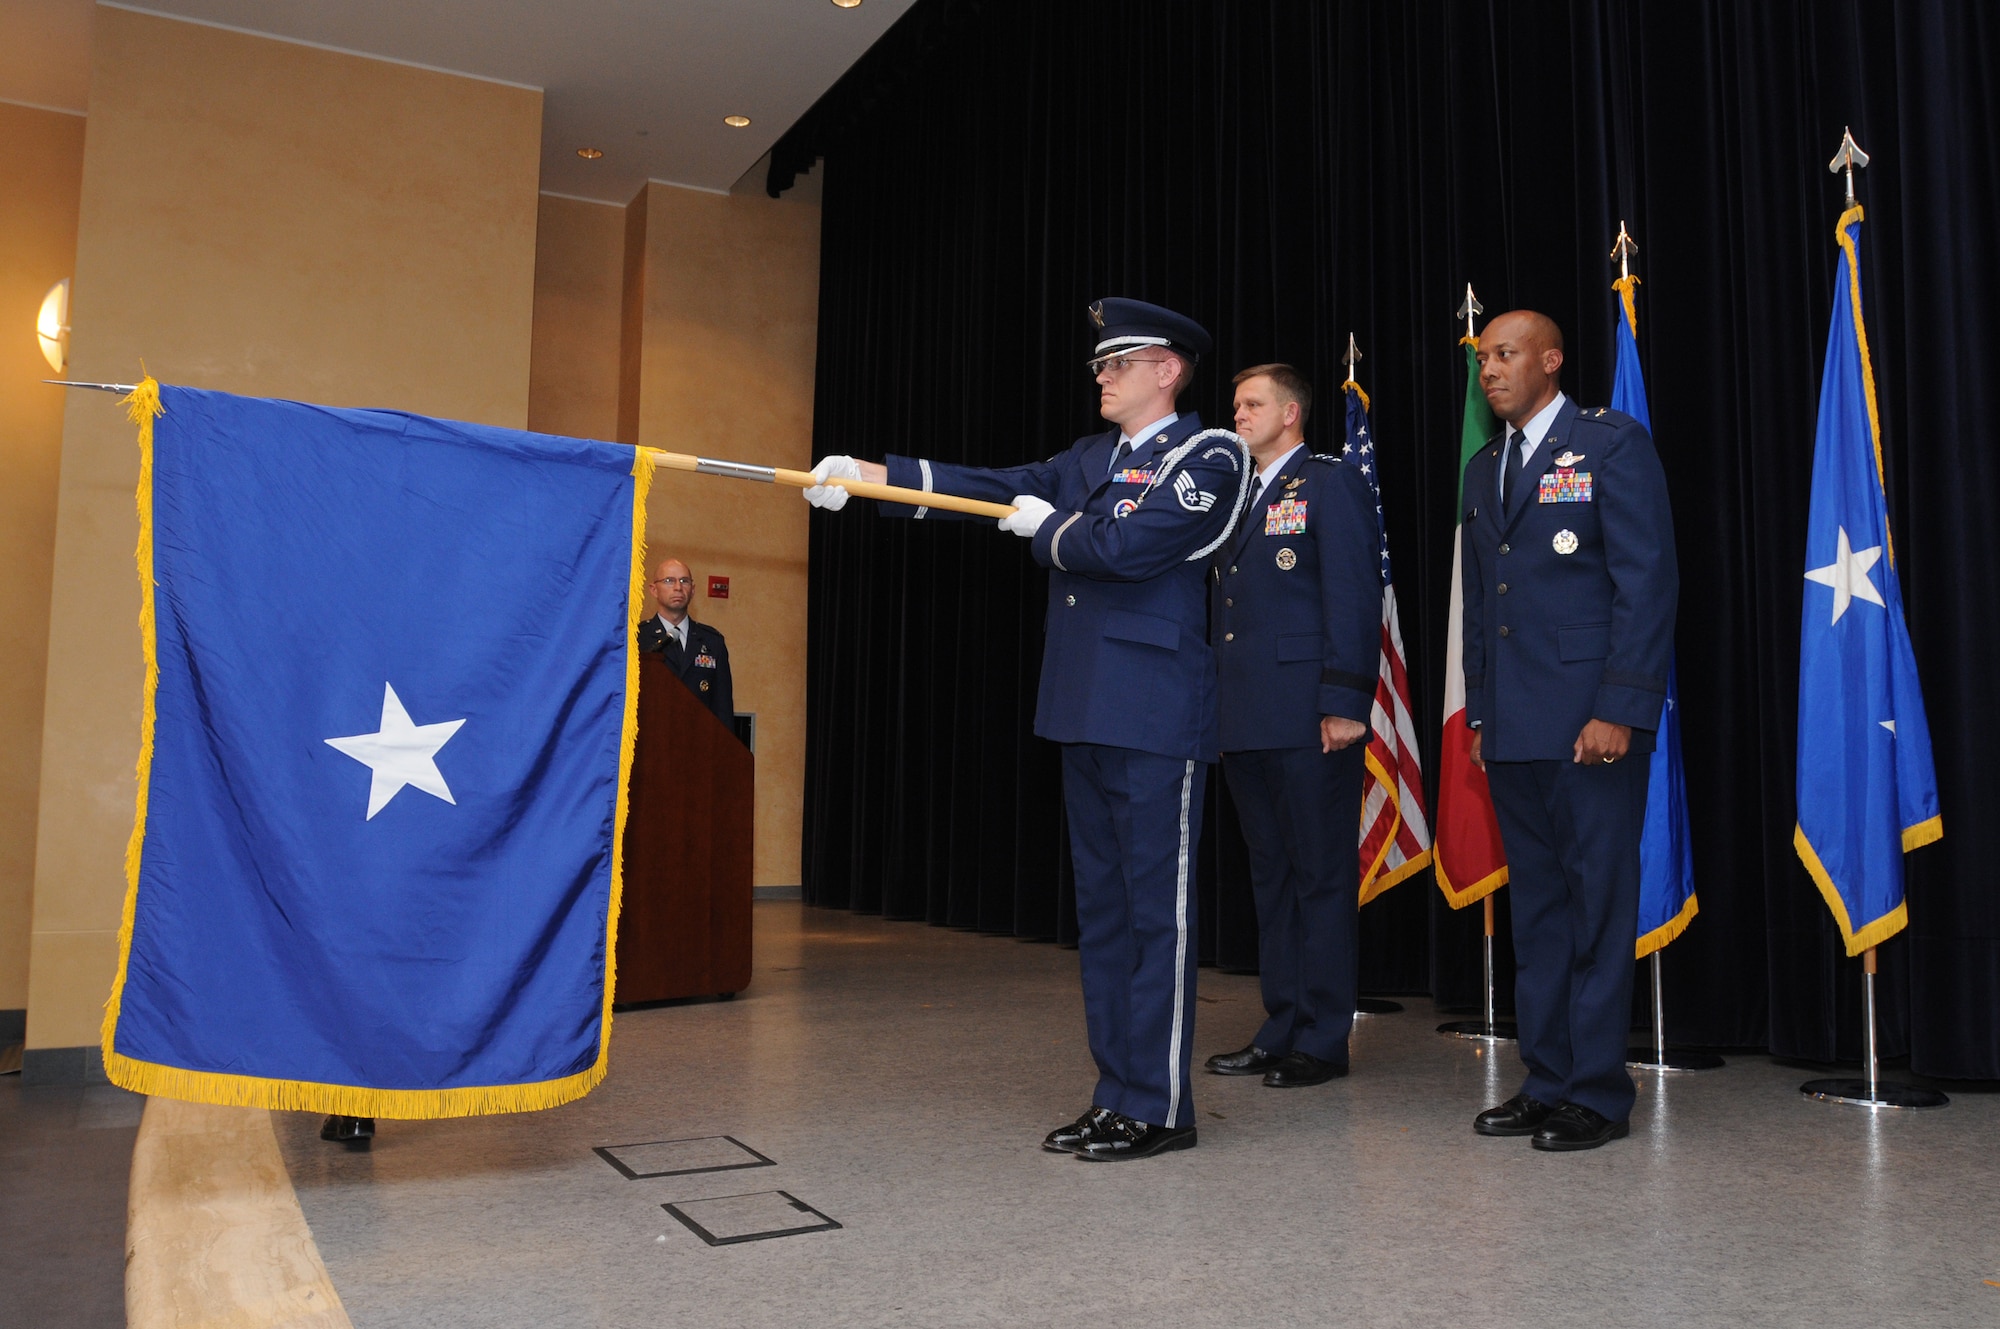 Lt. Gen. Frank Gorenc, 3rd Air Force commander, Ramstein Air Base, Germany (back left) and Brig. Gen. Charles Q. Brown Jr., 31st Fighter Wing commander look on as a member of the base honor guard detail unfurls the one-star flag during his promotion ceremony Sept. 18, 2009 at Aviano Air Base, Italy.  General Gorenc presided over the ceremony.   (U.S. Air Force photo/Staff Sgt. Patrick Dixon) 